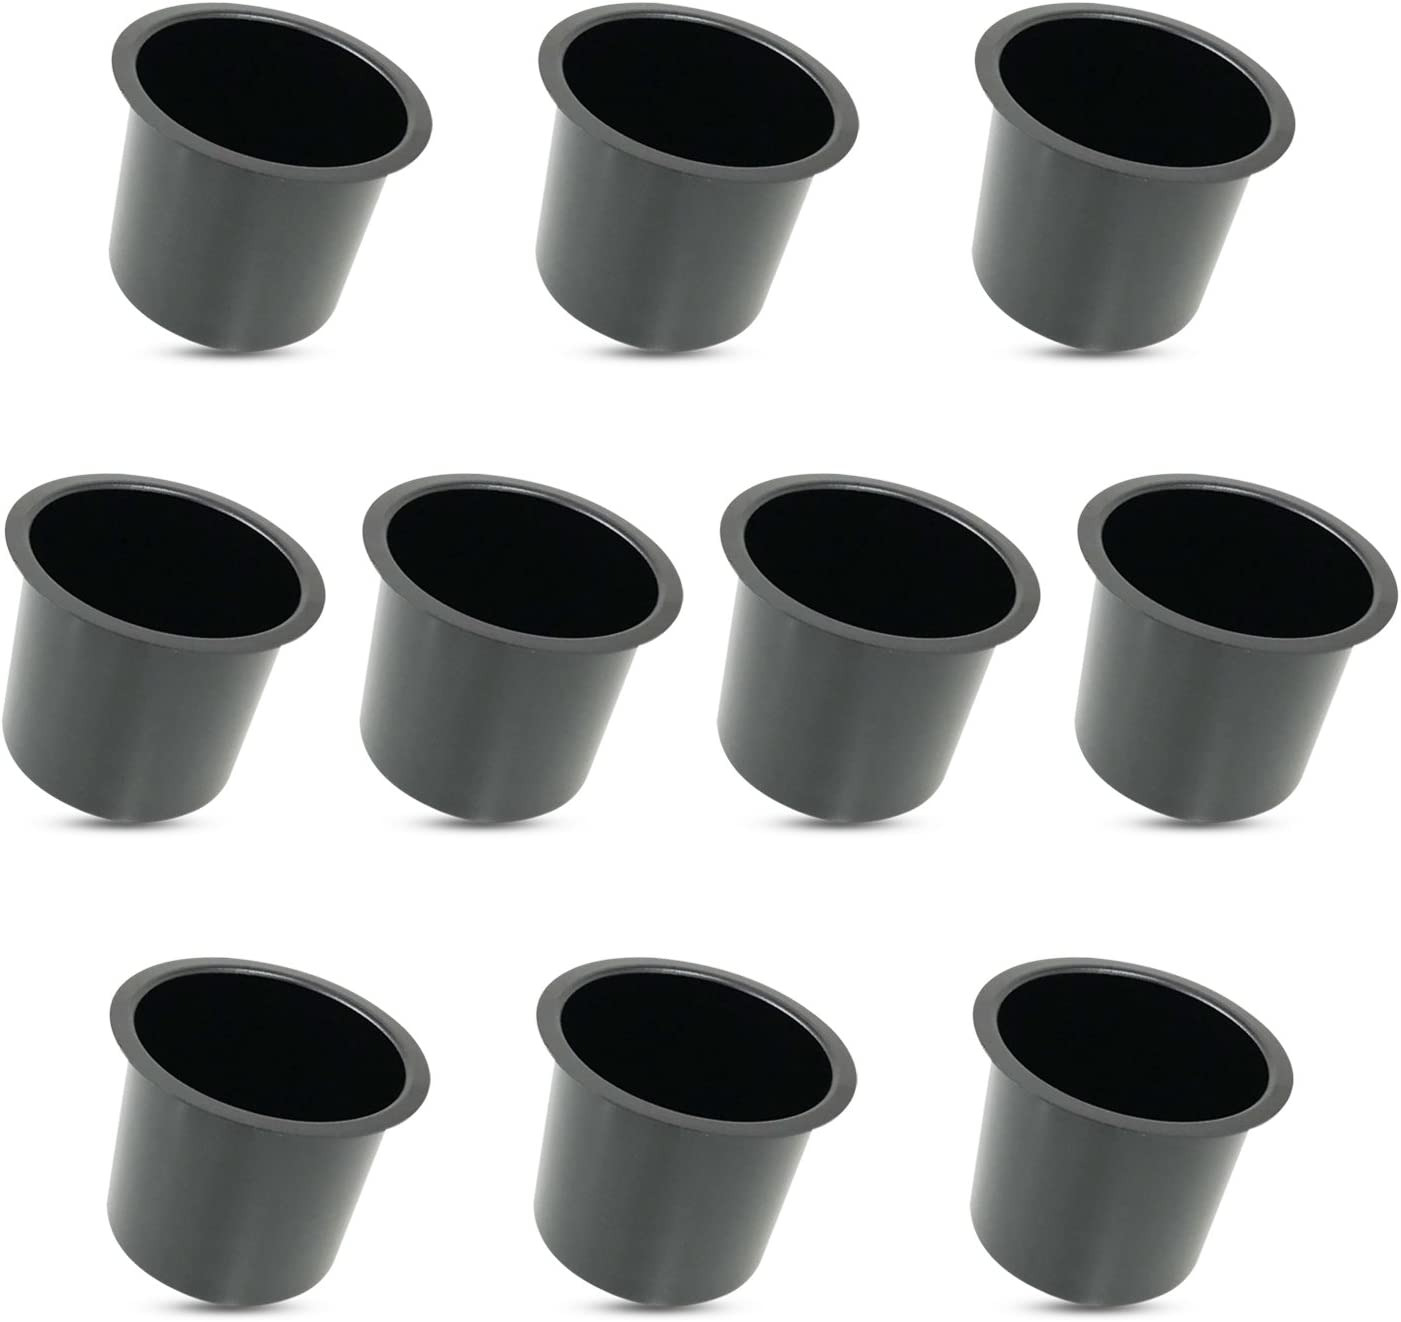 Yuanhe Lot of 10 Aluminum Jumbo Drink Cup Holders, Poker Table Drink Holder, Boa